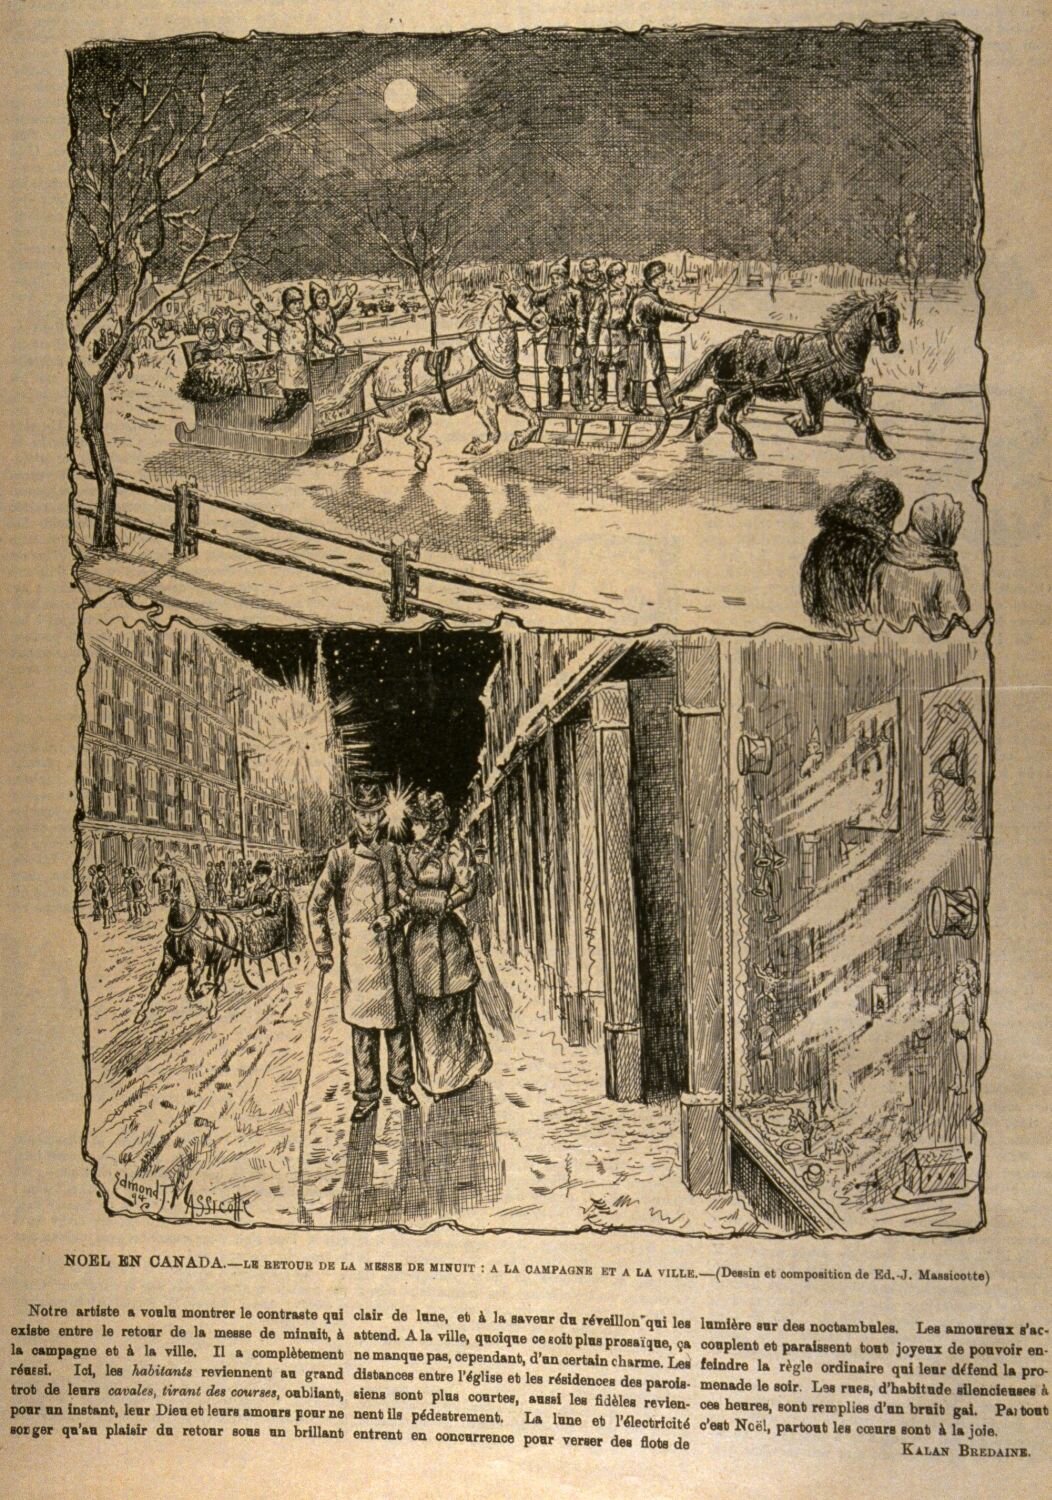 1894 drawings of "Christmas in Canada" (BAnQ)